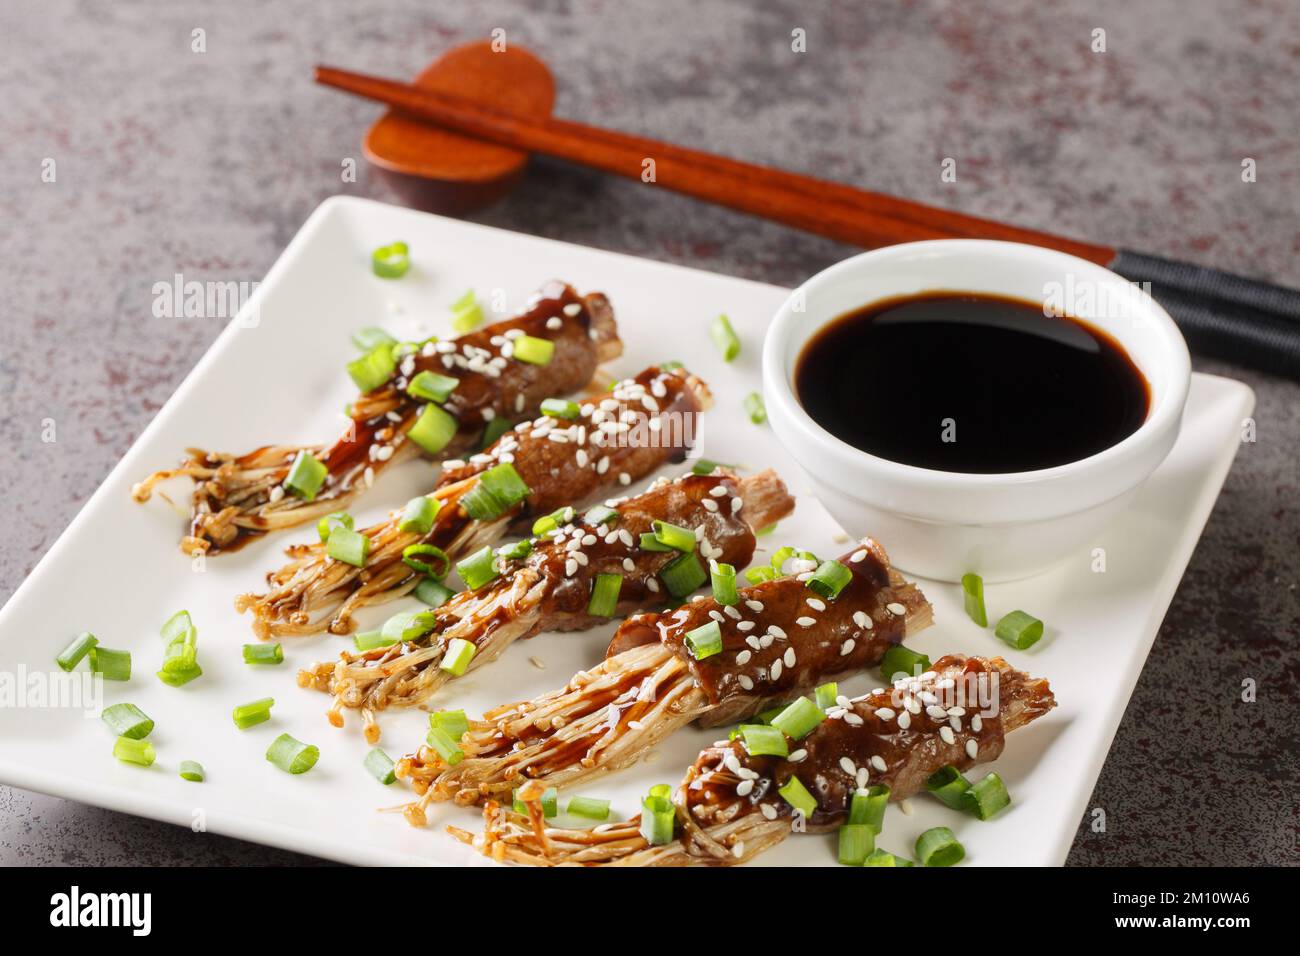 Delicious fried beef roll with enoki mushrooms with teriyaki sauce, green onions and sesame close-up in a plate on the table. Horizontal Stock Photo